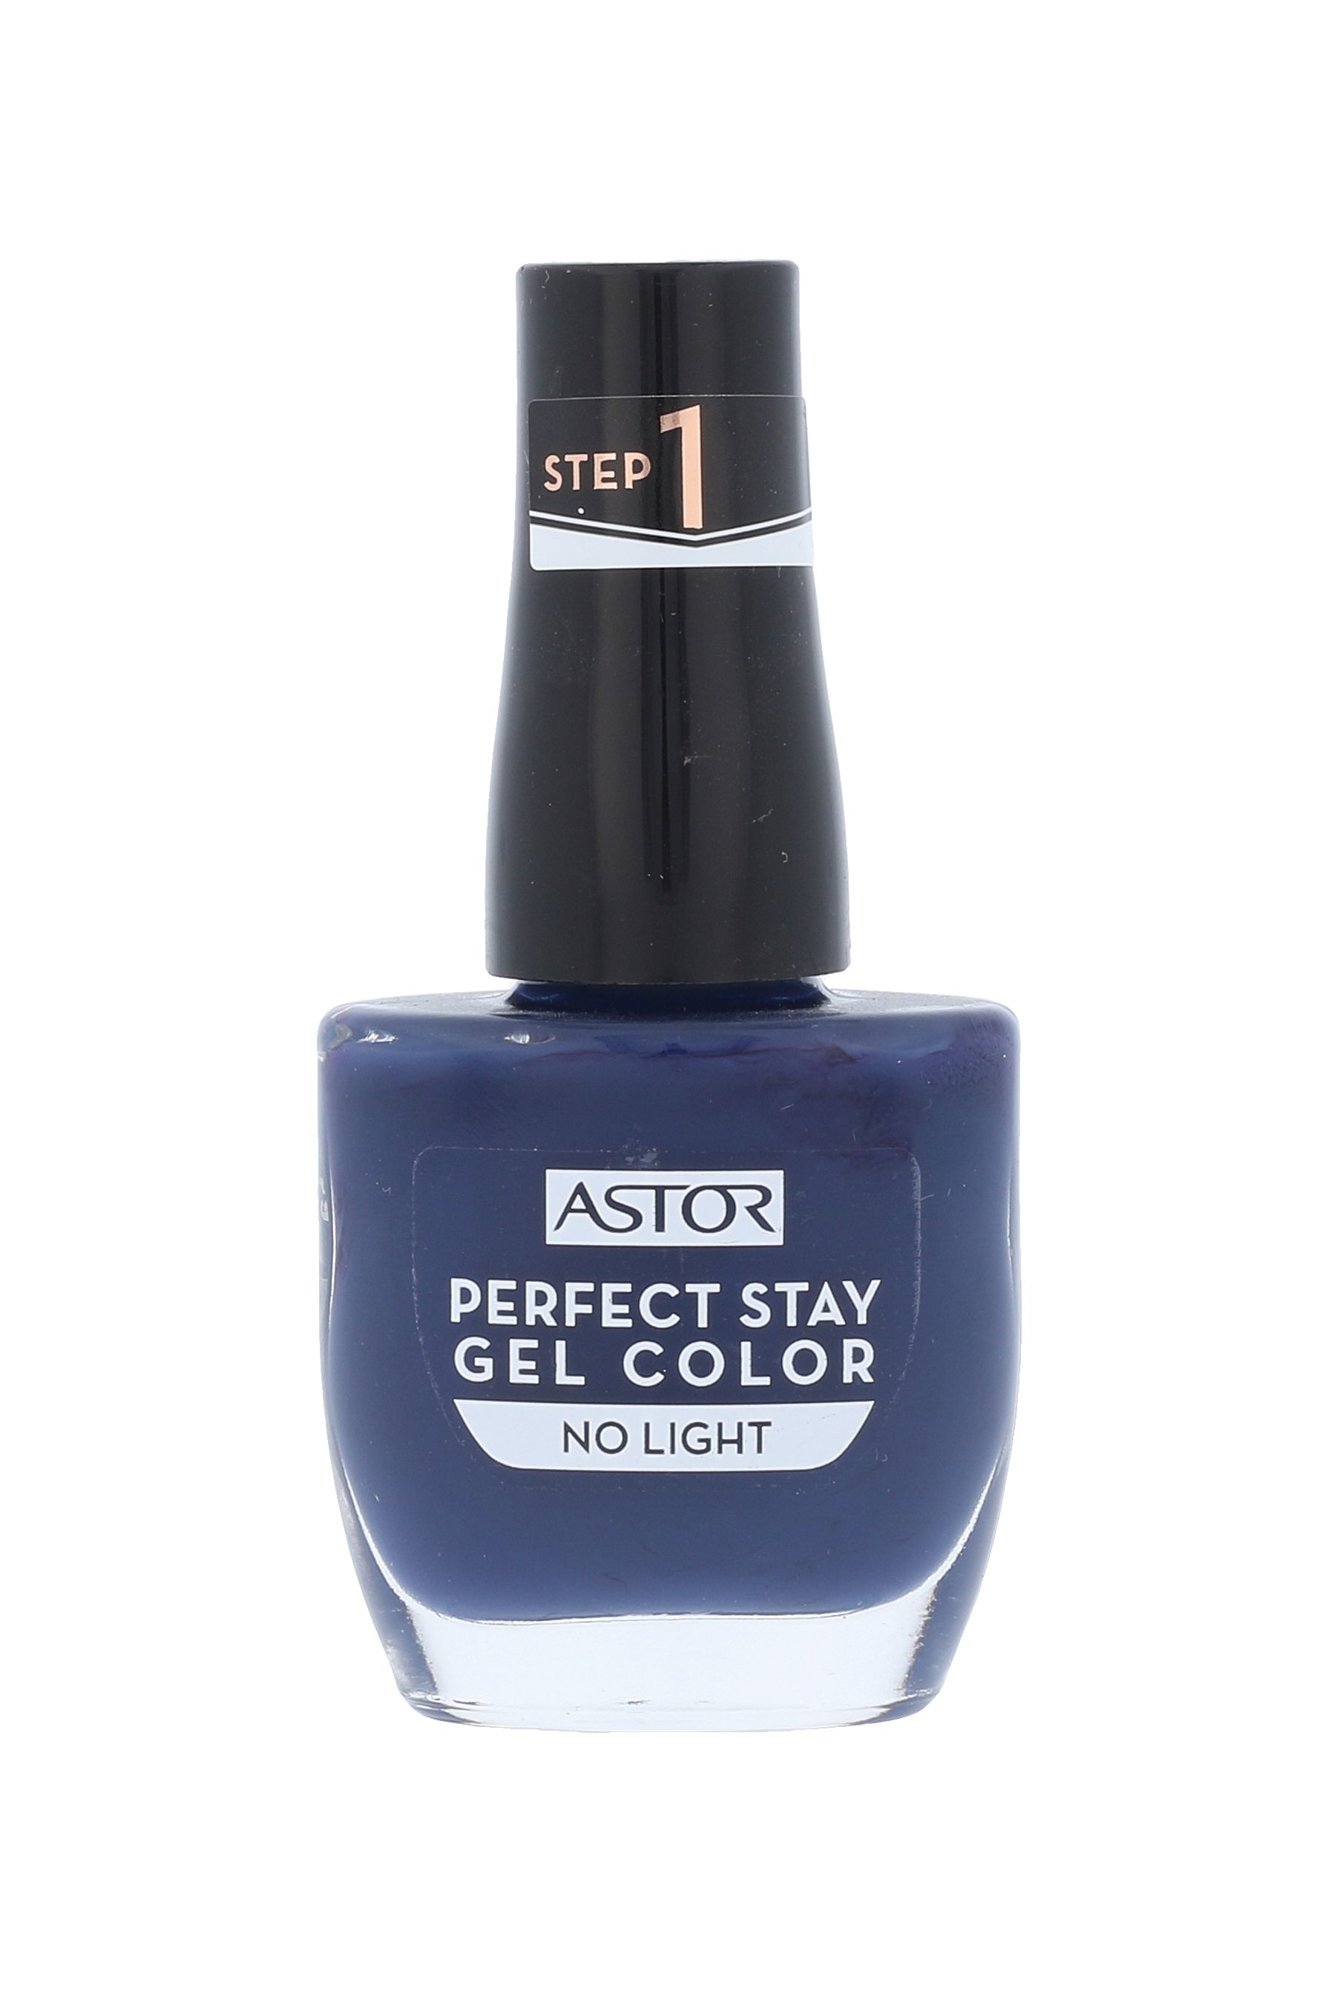 Astor Perfect Stay Gel Color